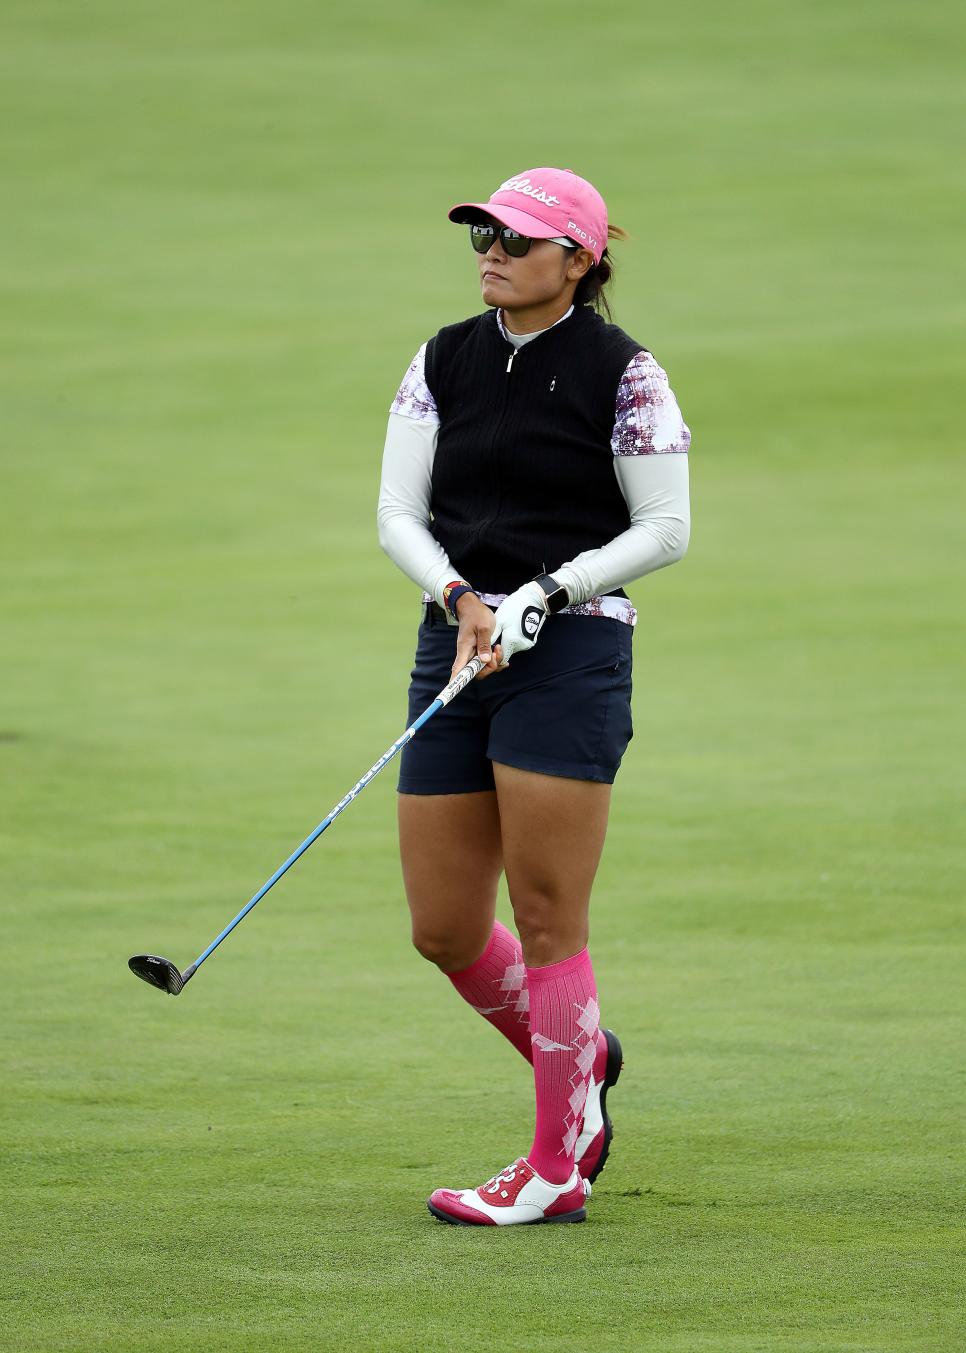 CHASKA, MINNESOTA - JUNE 22:  Jimin Kang hits her second shot on the 1st hole during the third round of the KPMG Women\'s PGA Championship at Hazeltine National Golf Course on June 22, 2019 in Chaska, Minnesota. (Photo by Jamie Squire/Getty Images)